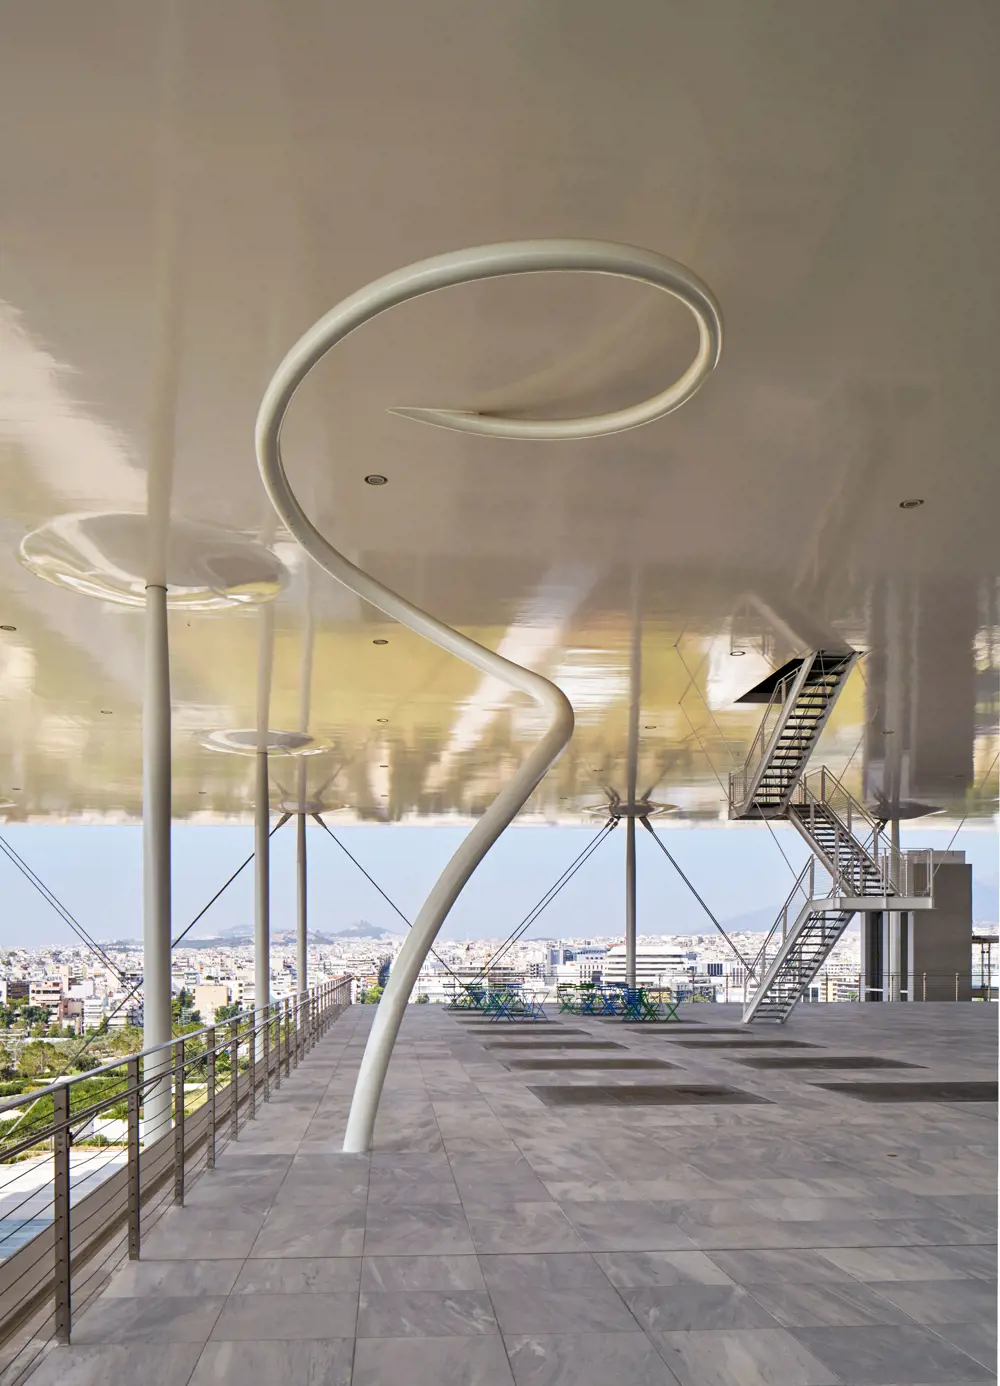 A white thin spiral structure going down from a ceiling to a floor.